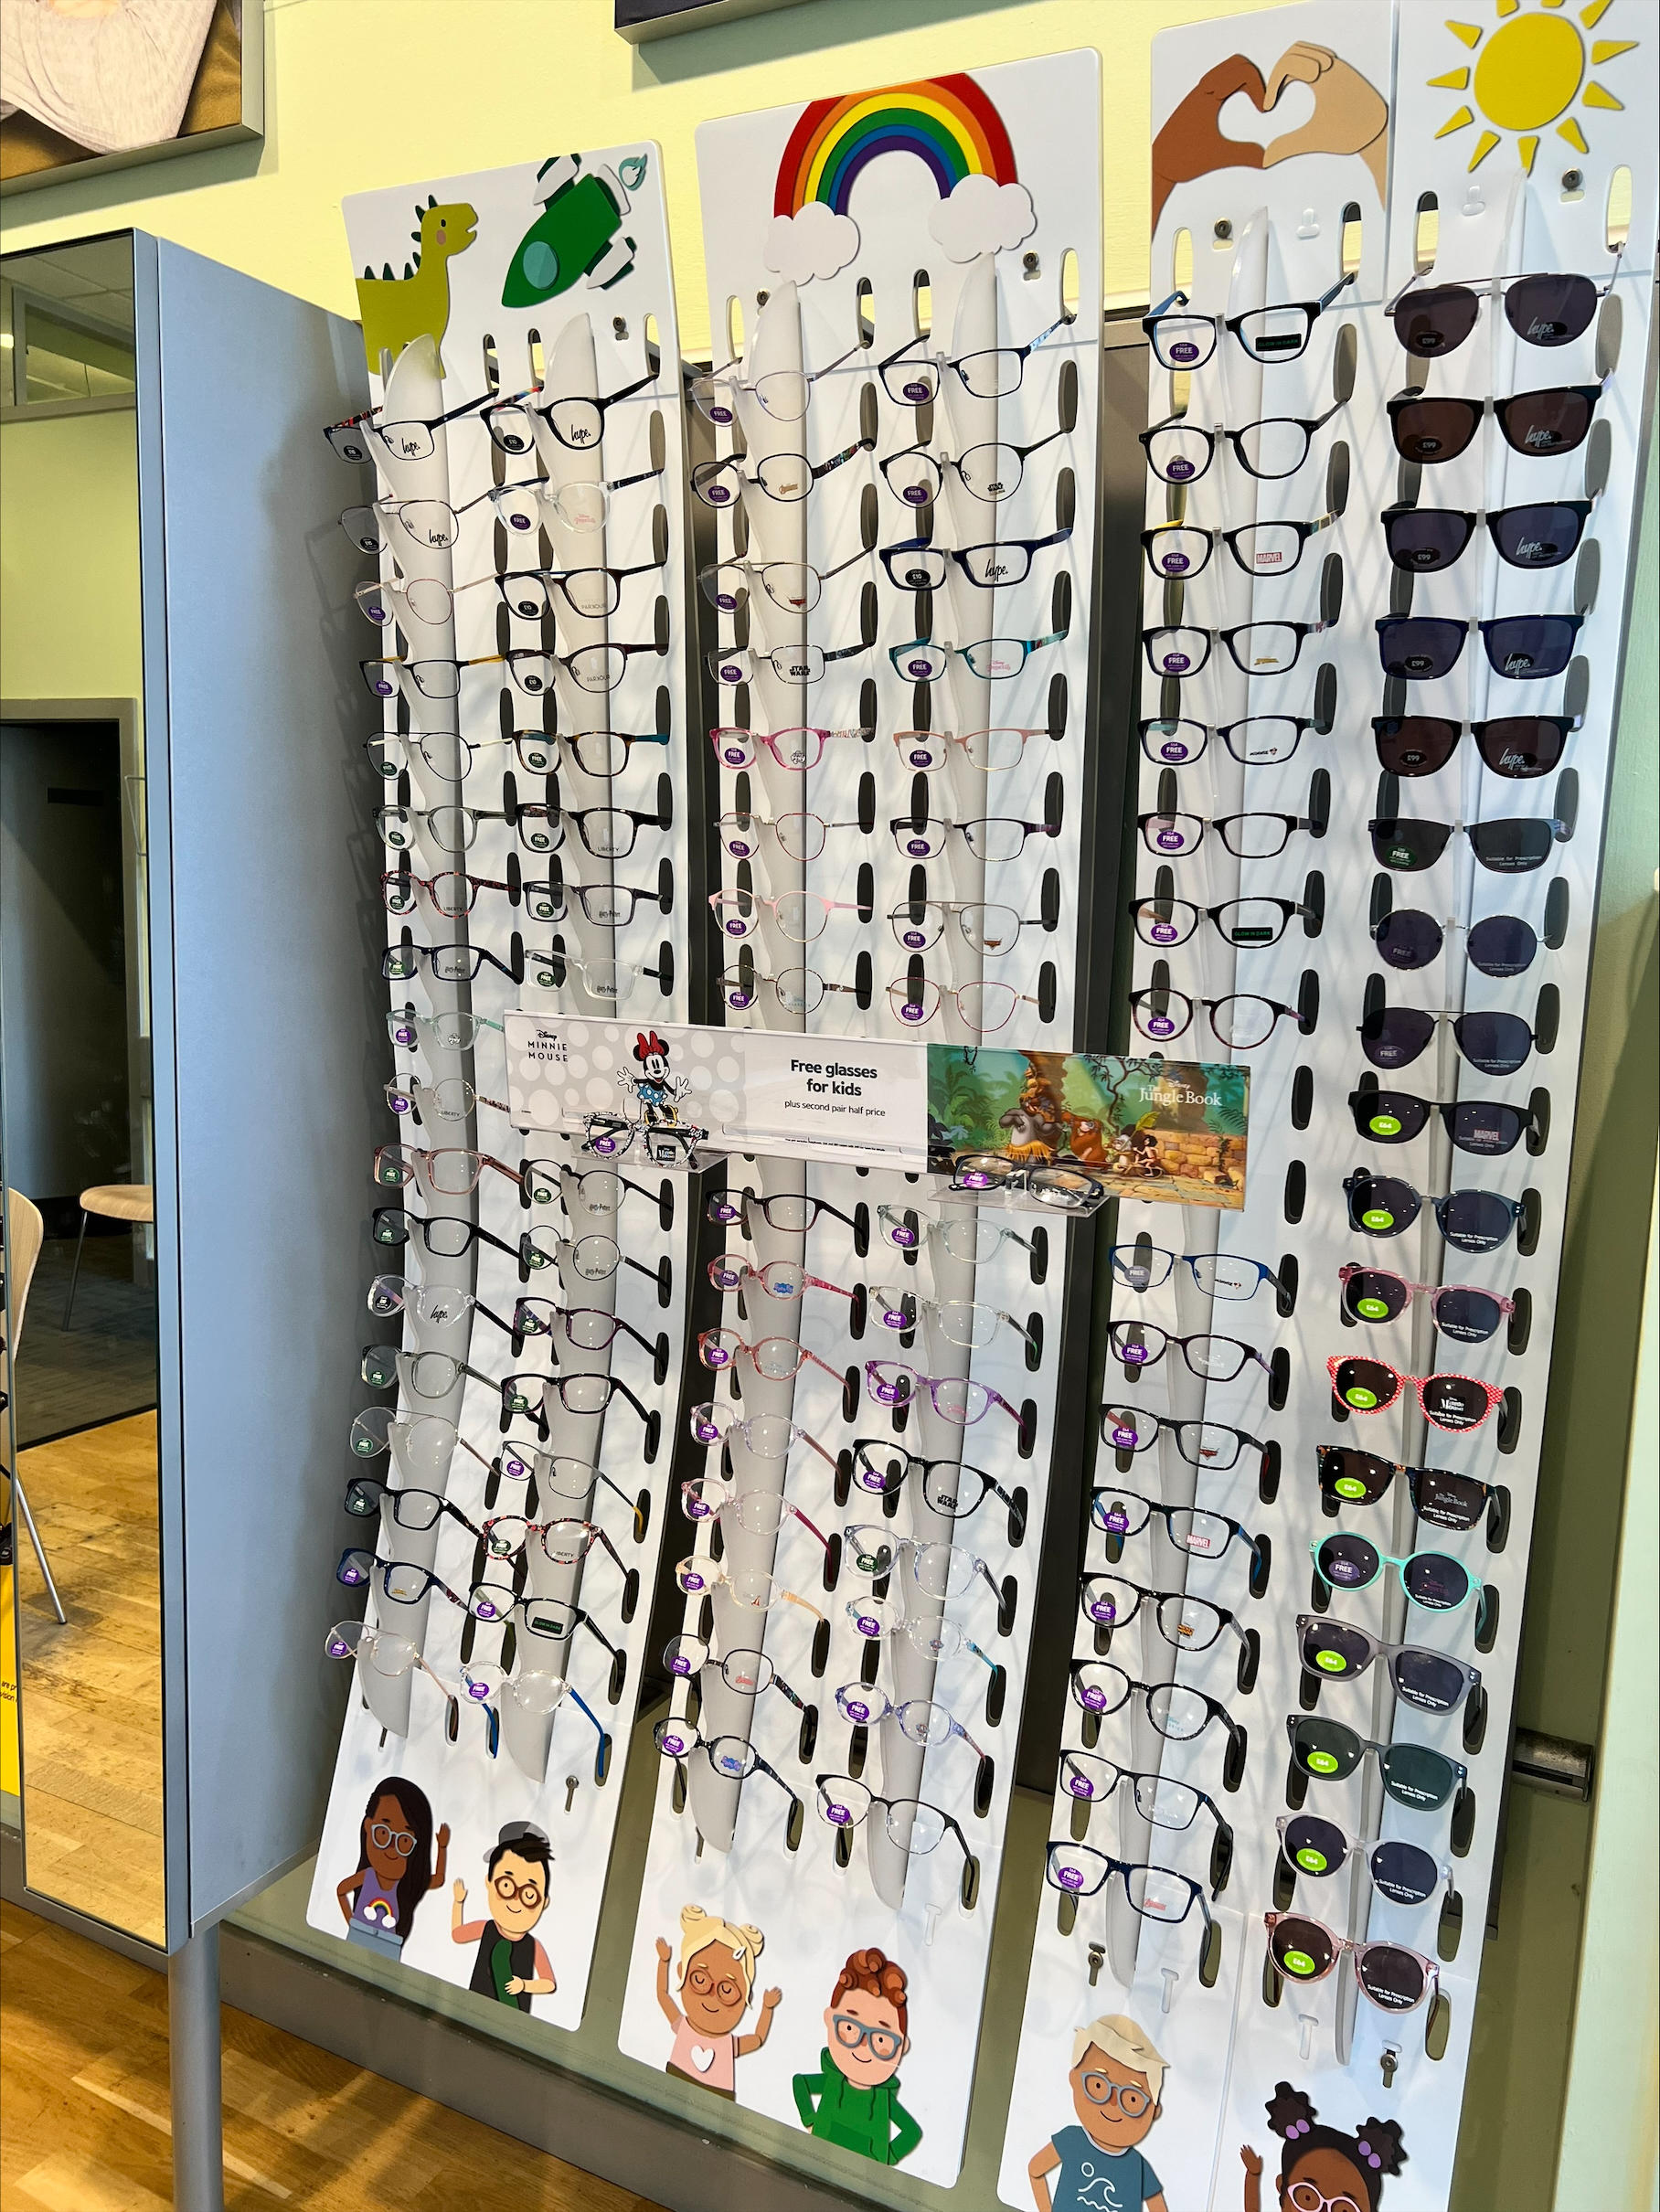 Images Specsavers Opticians and Audiologists - Byres Road